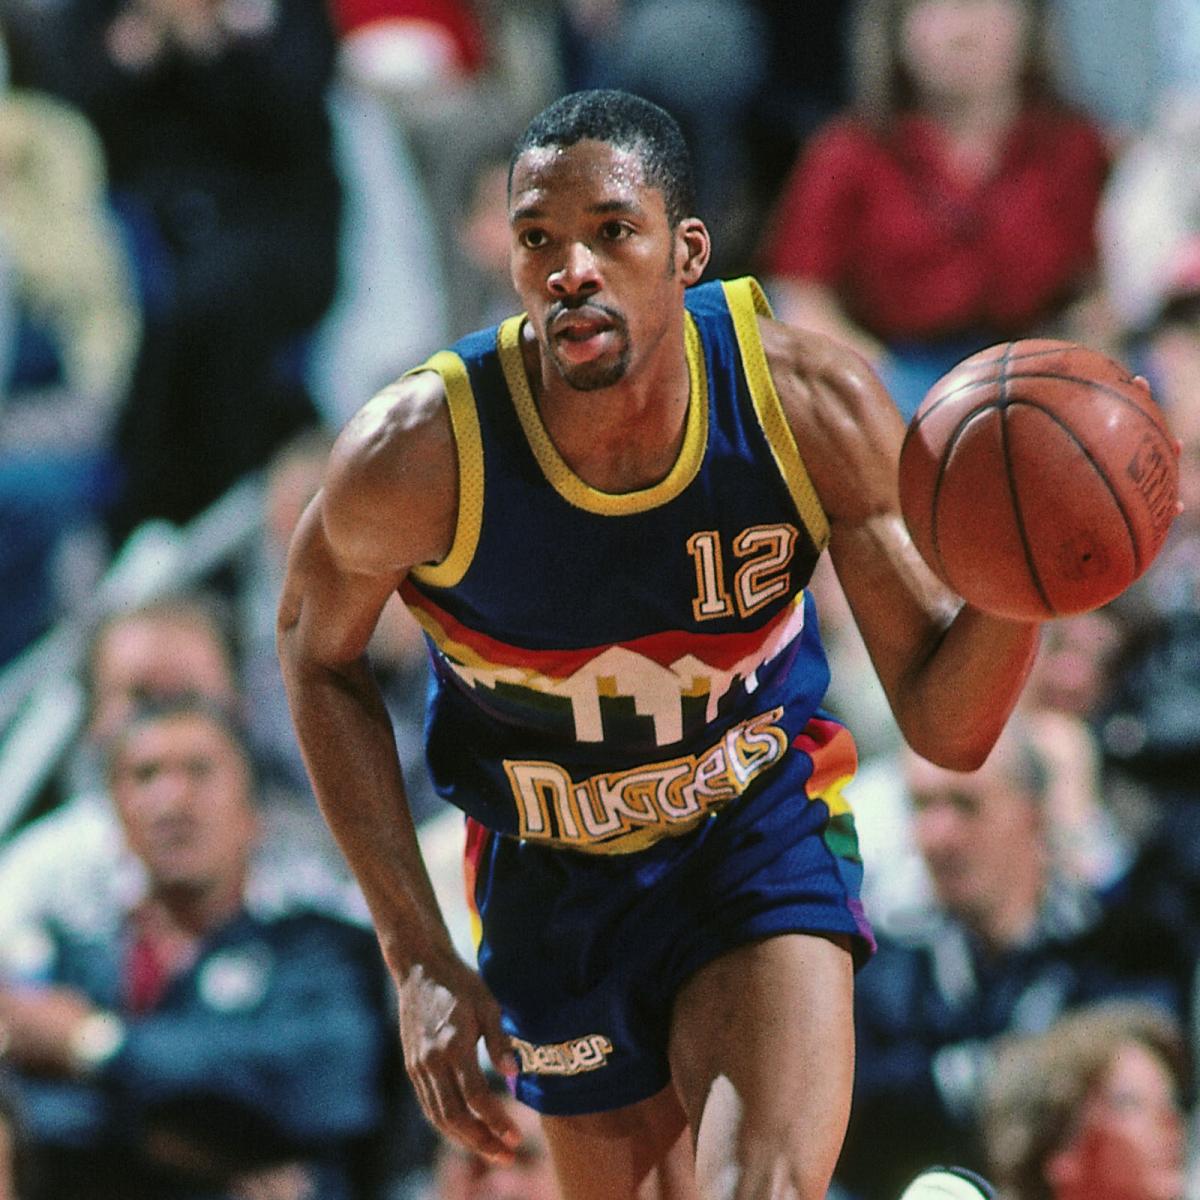 Over 47 years, the Nuggets have retired these 6 numbers